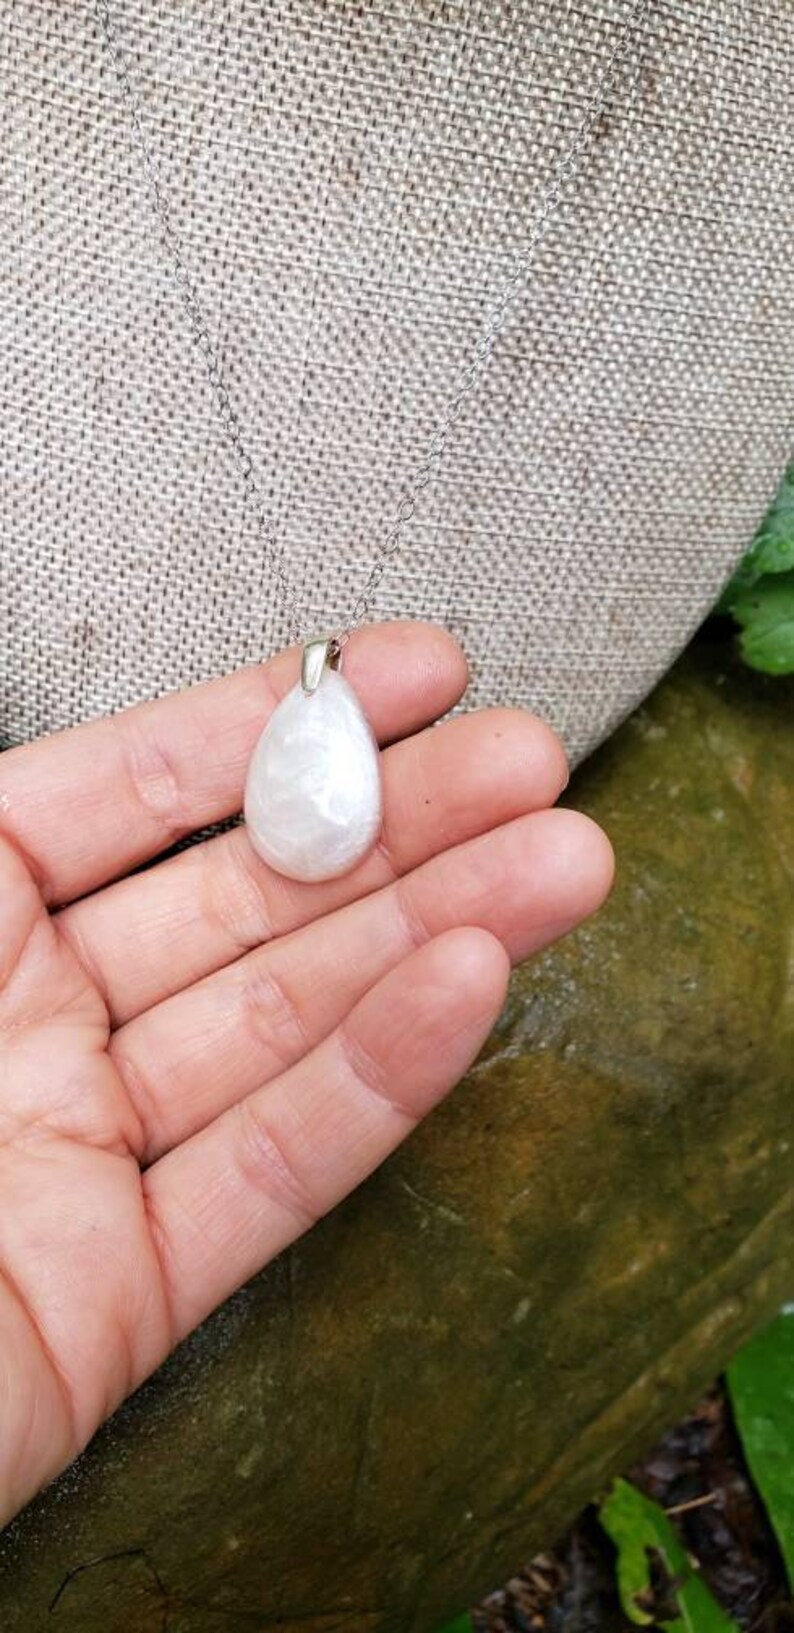 NEW! Teardrop Shaped Breastmilk DIY Add On Project Option to the Maidinthewoods Preservation and Casting Kit...Includes Mold and SS Chain Op 